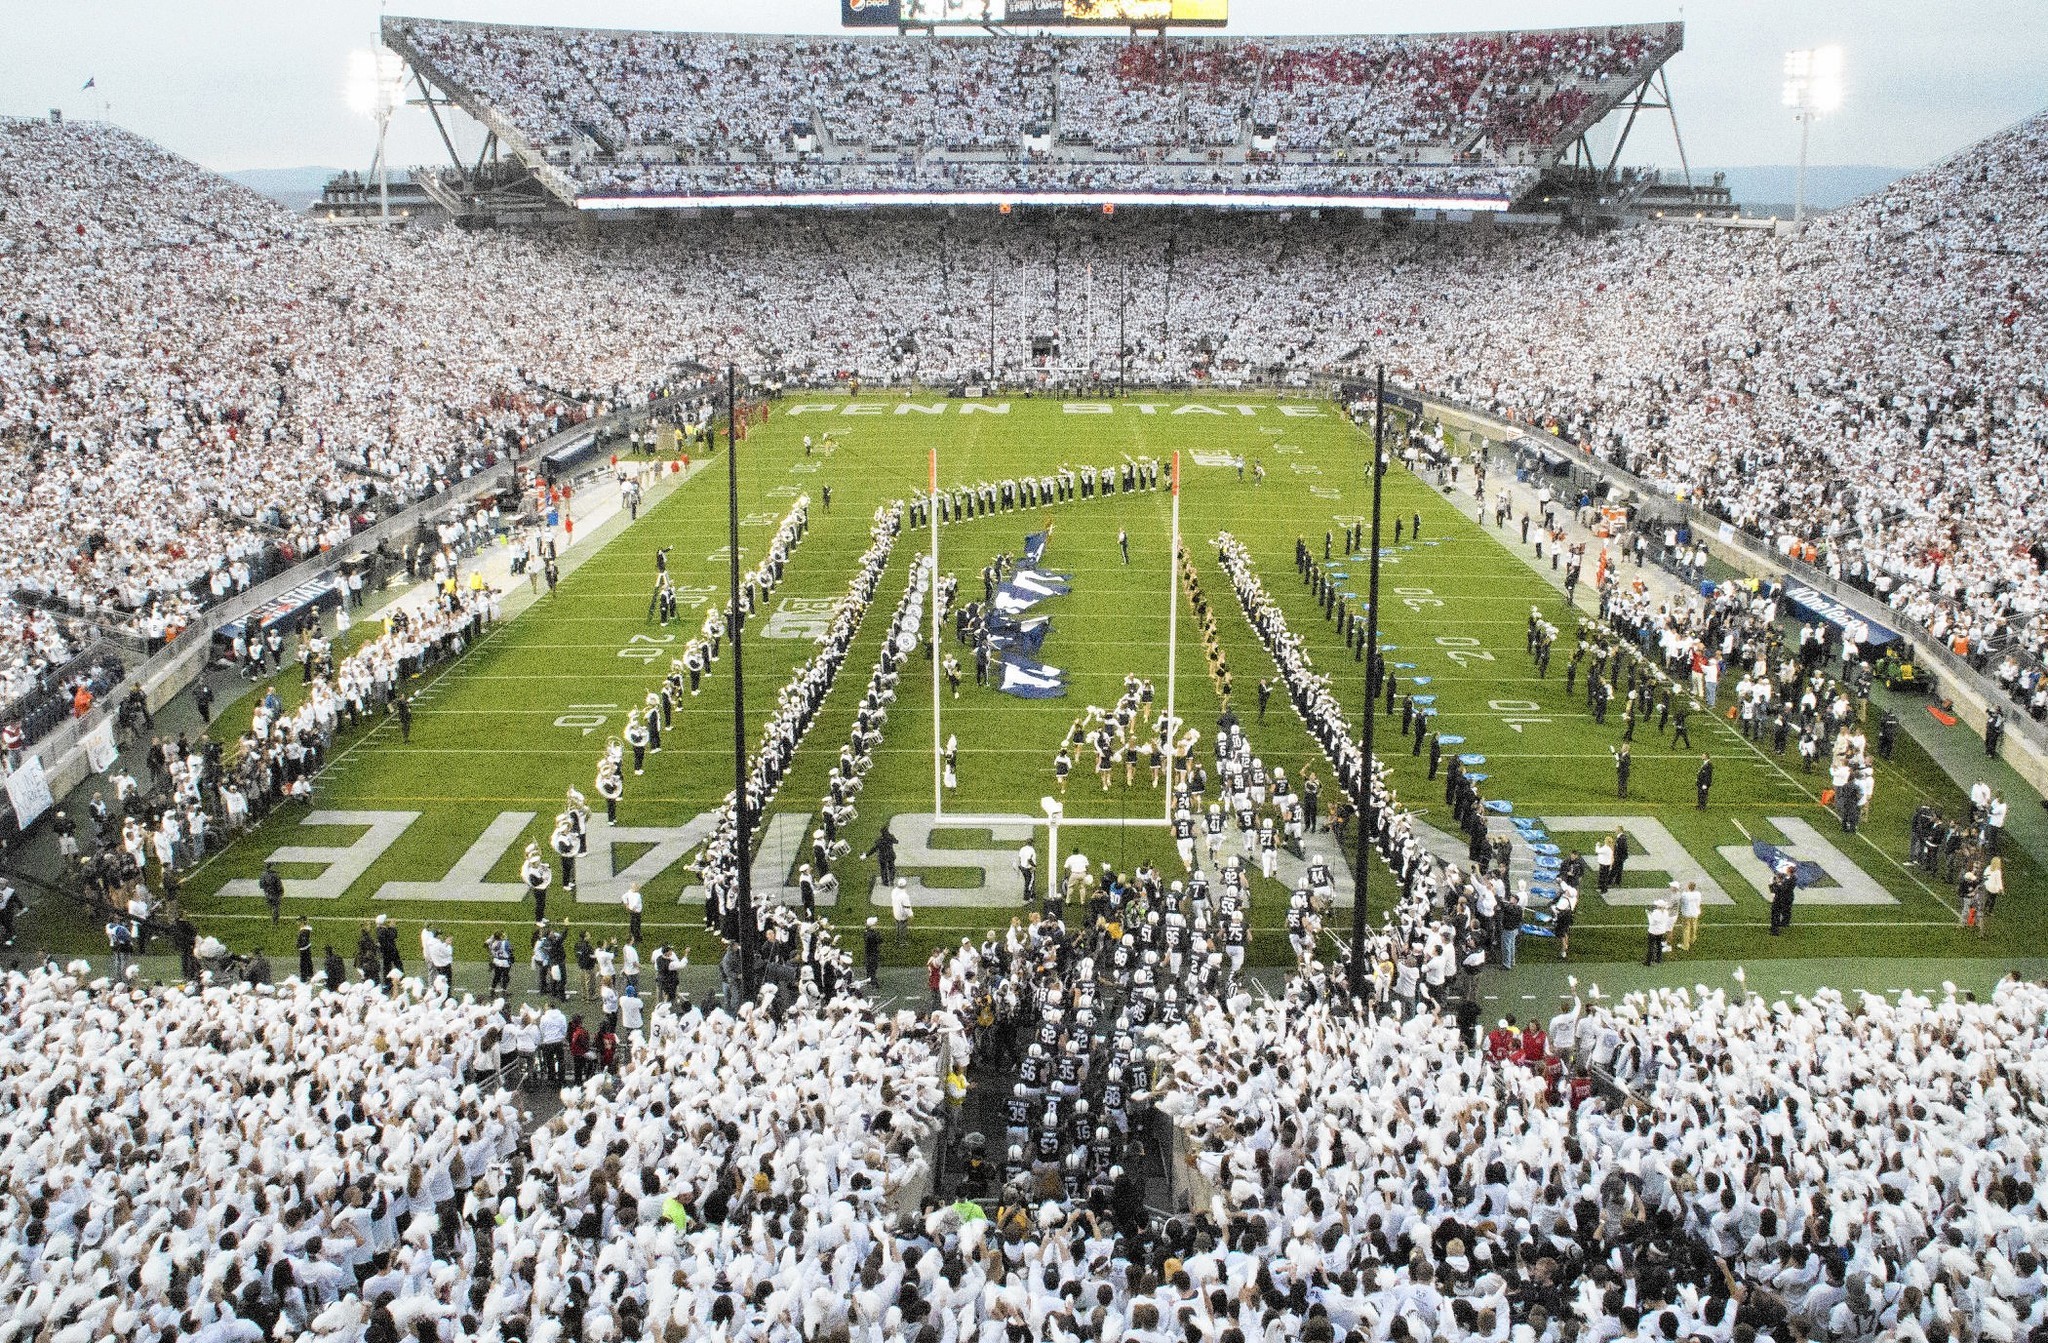 Fewer, but bigger, seats could be part of Beaver Stadium renovation